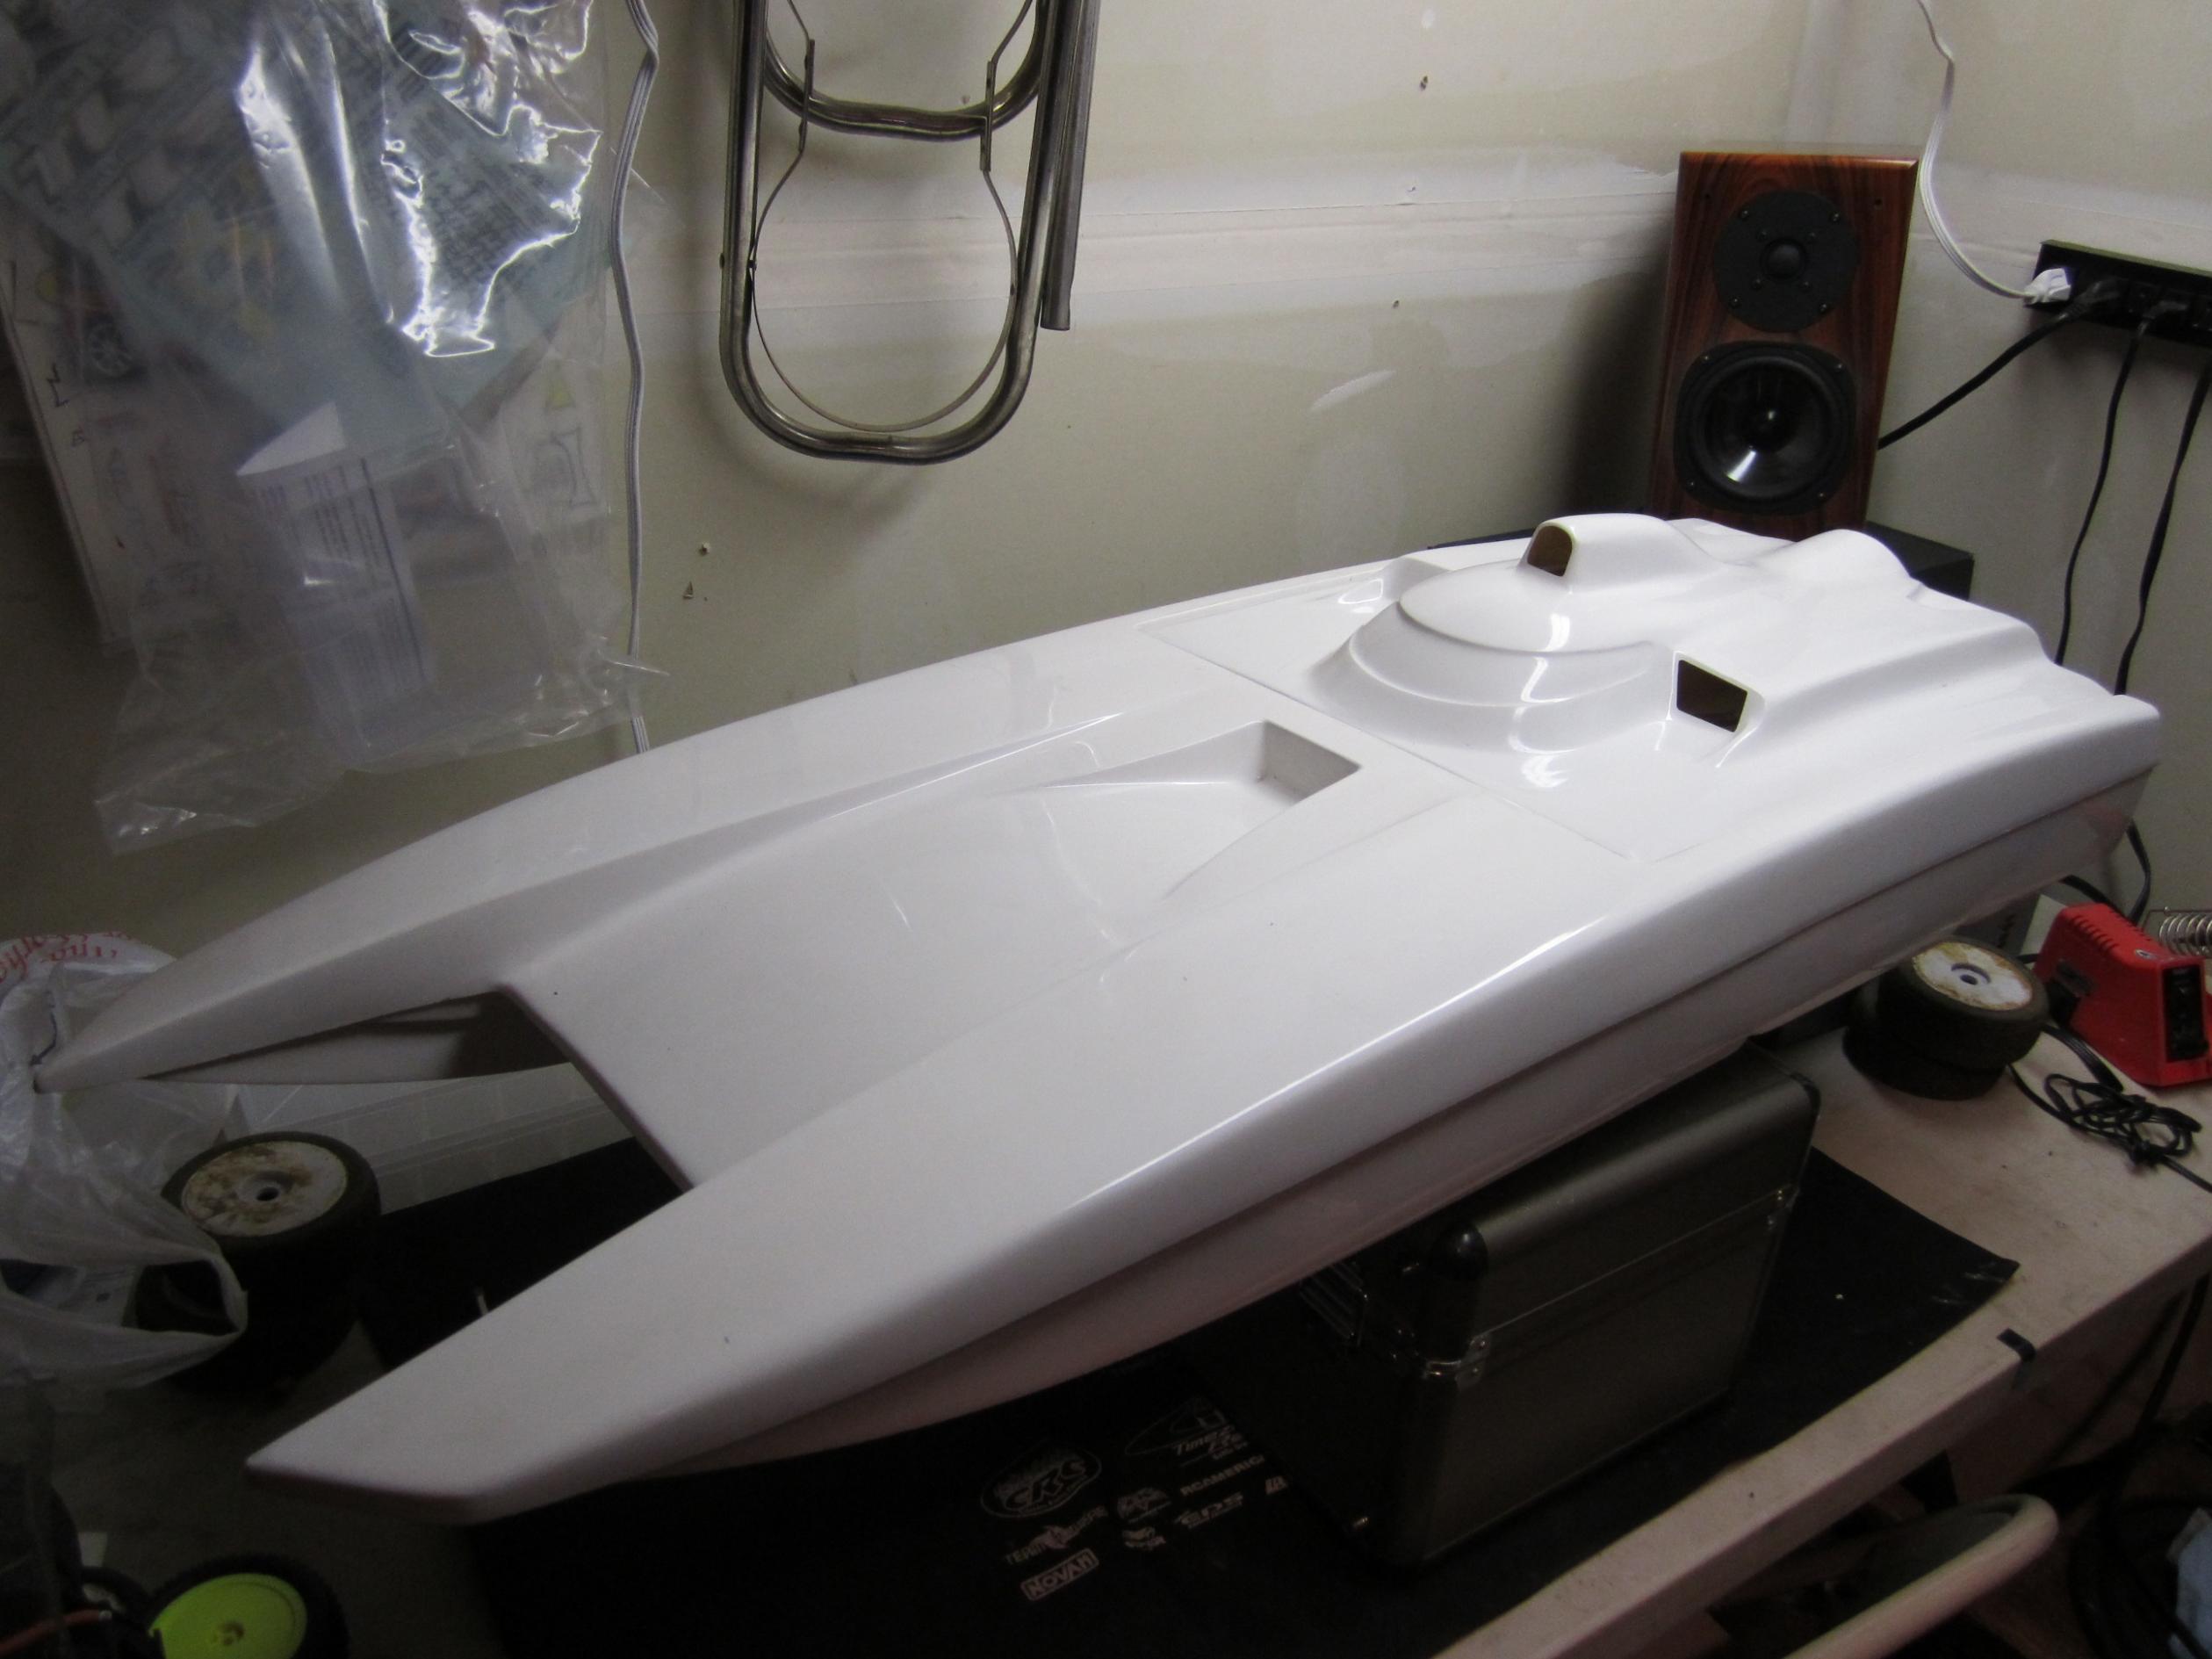 Areomarine Conquest 43" cat boat new!! - R/C Tech Forums